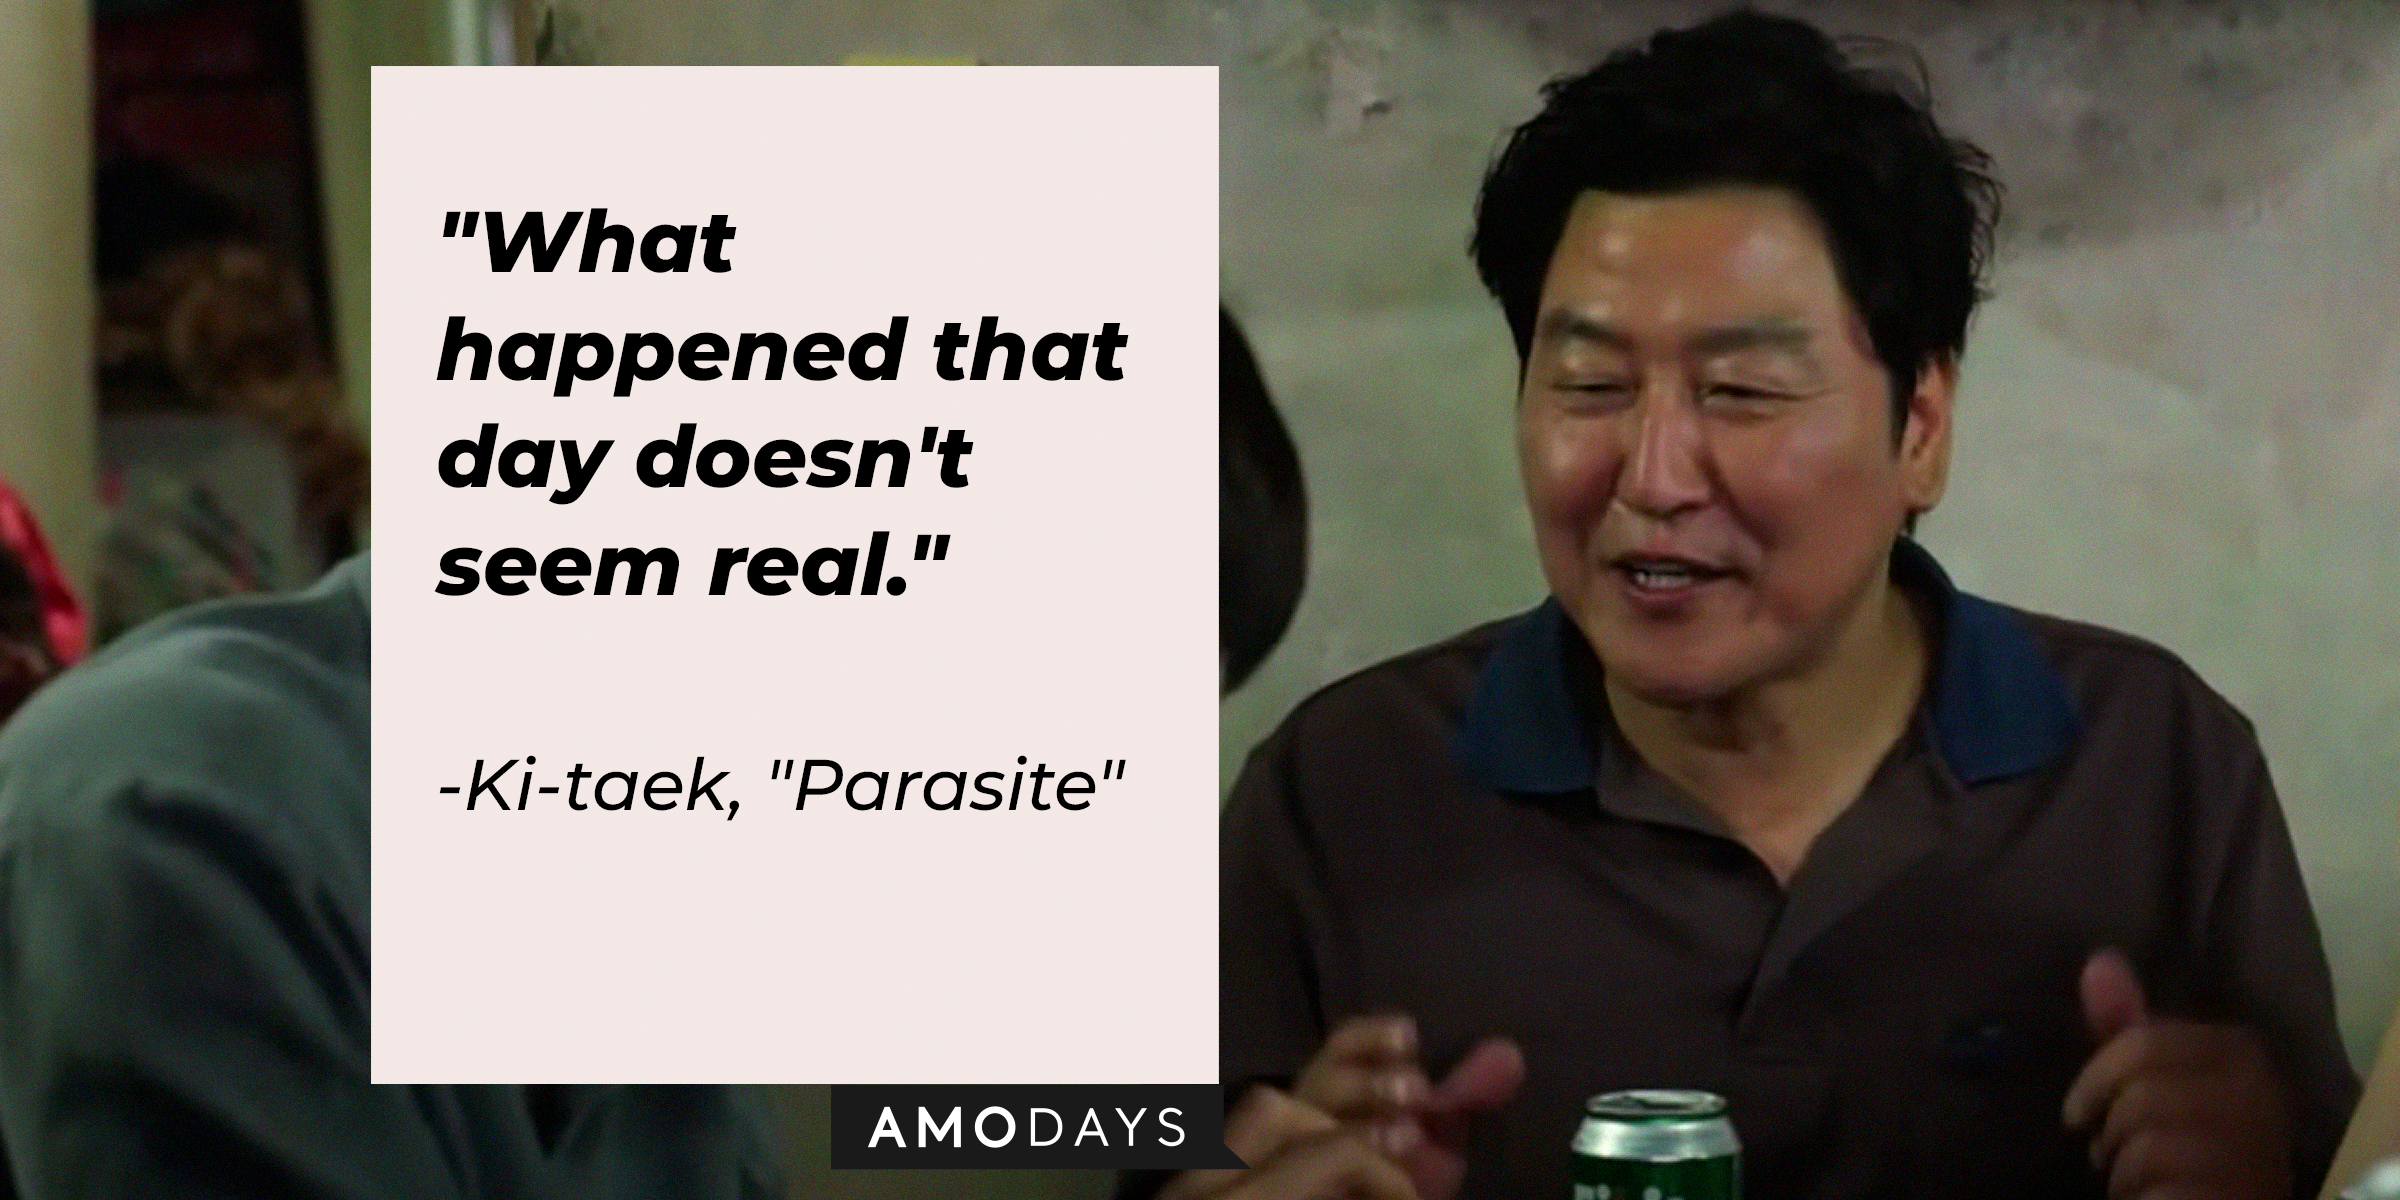 Ki-taek with his quote: "What happened that day doesn't seem real." | Source: Facebook.com/ParasiteMovie